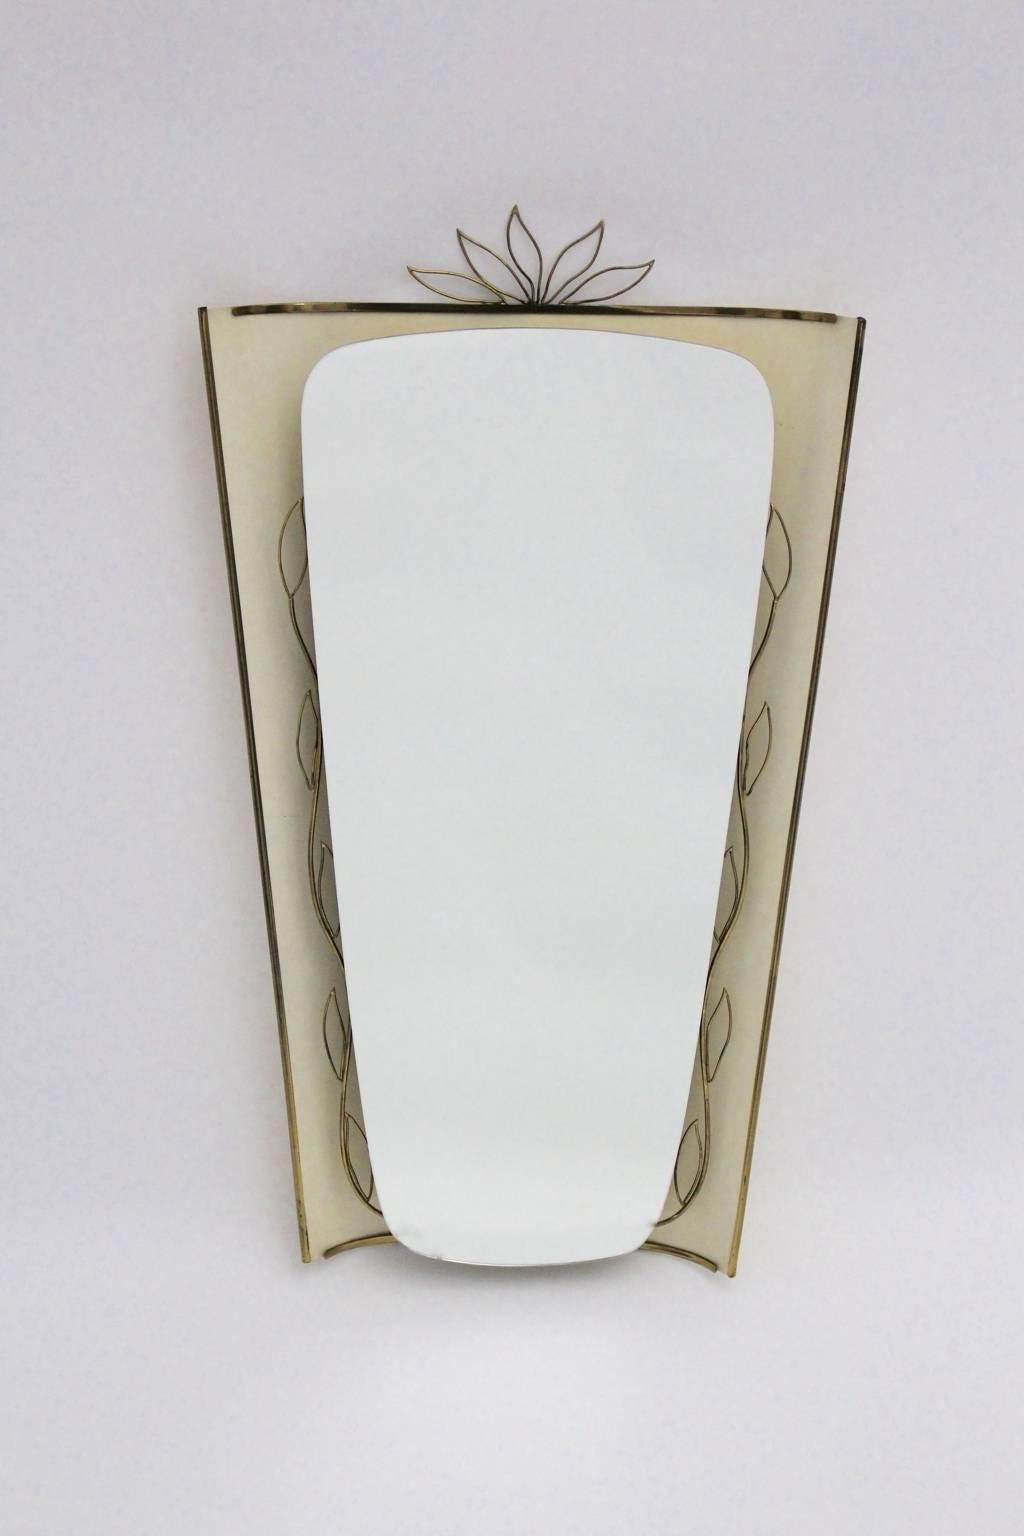 Lacquered Mid-Century Modern Vintage Wall Mirror Floor Mirror 1950s Germany For Sale